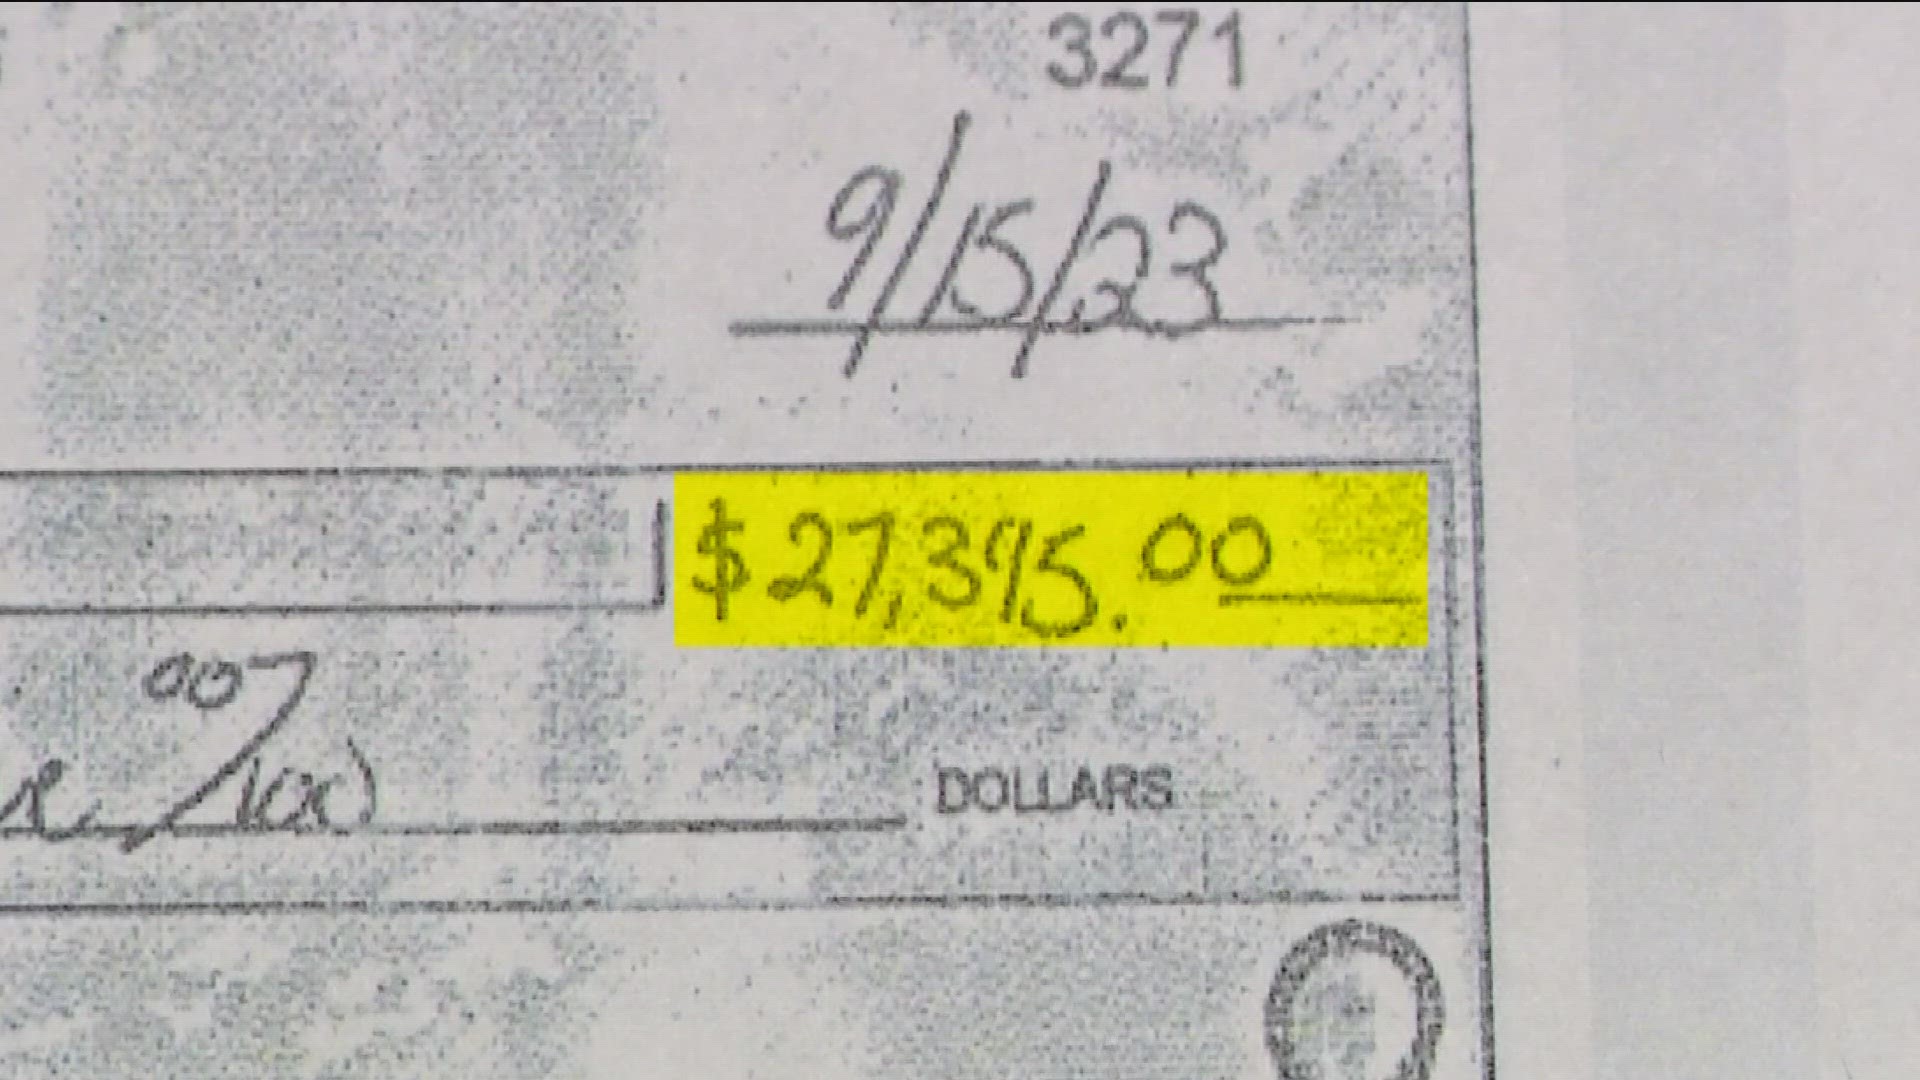 After a $395 check was altered to and cashed for $27,000 in September, a local couple will be reimbursed.